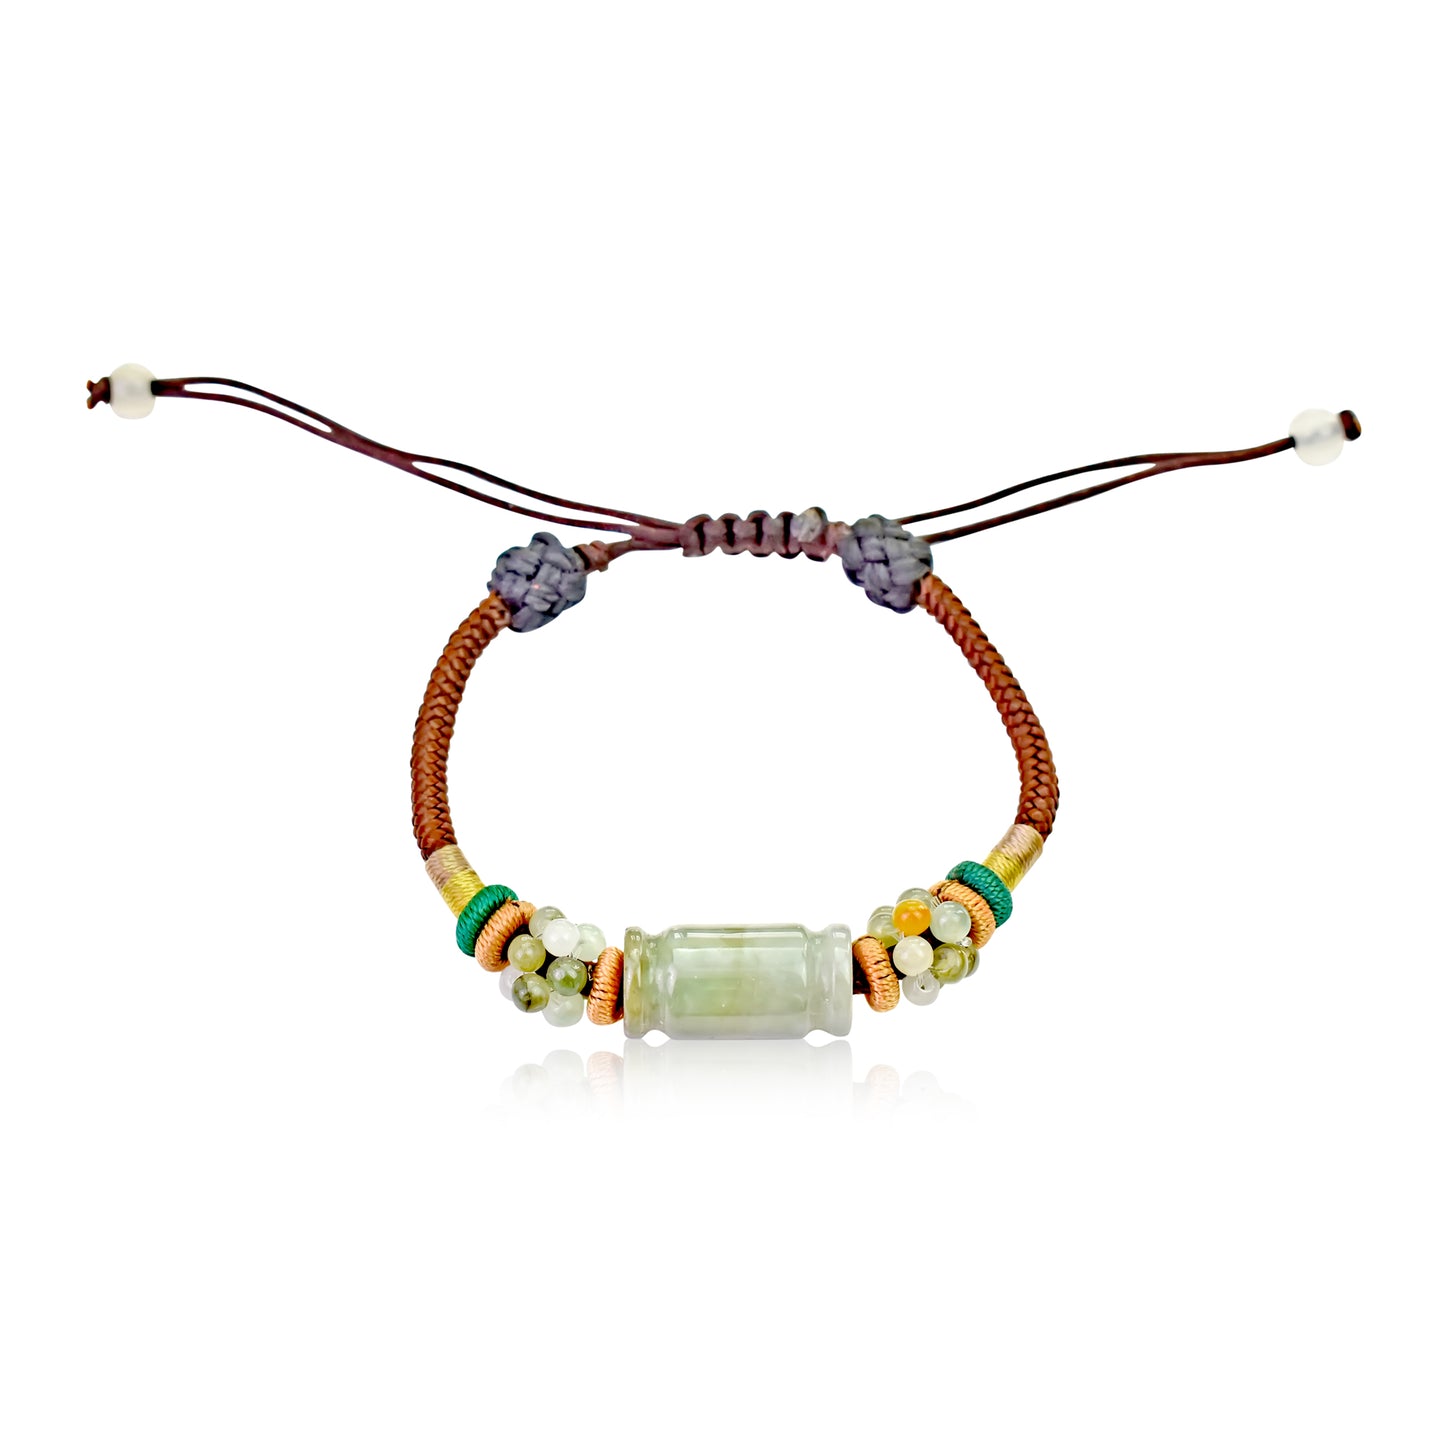 Wear a Vibrant Charm Bracelet Every Day with this Jade Bracelet